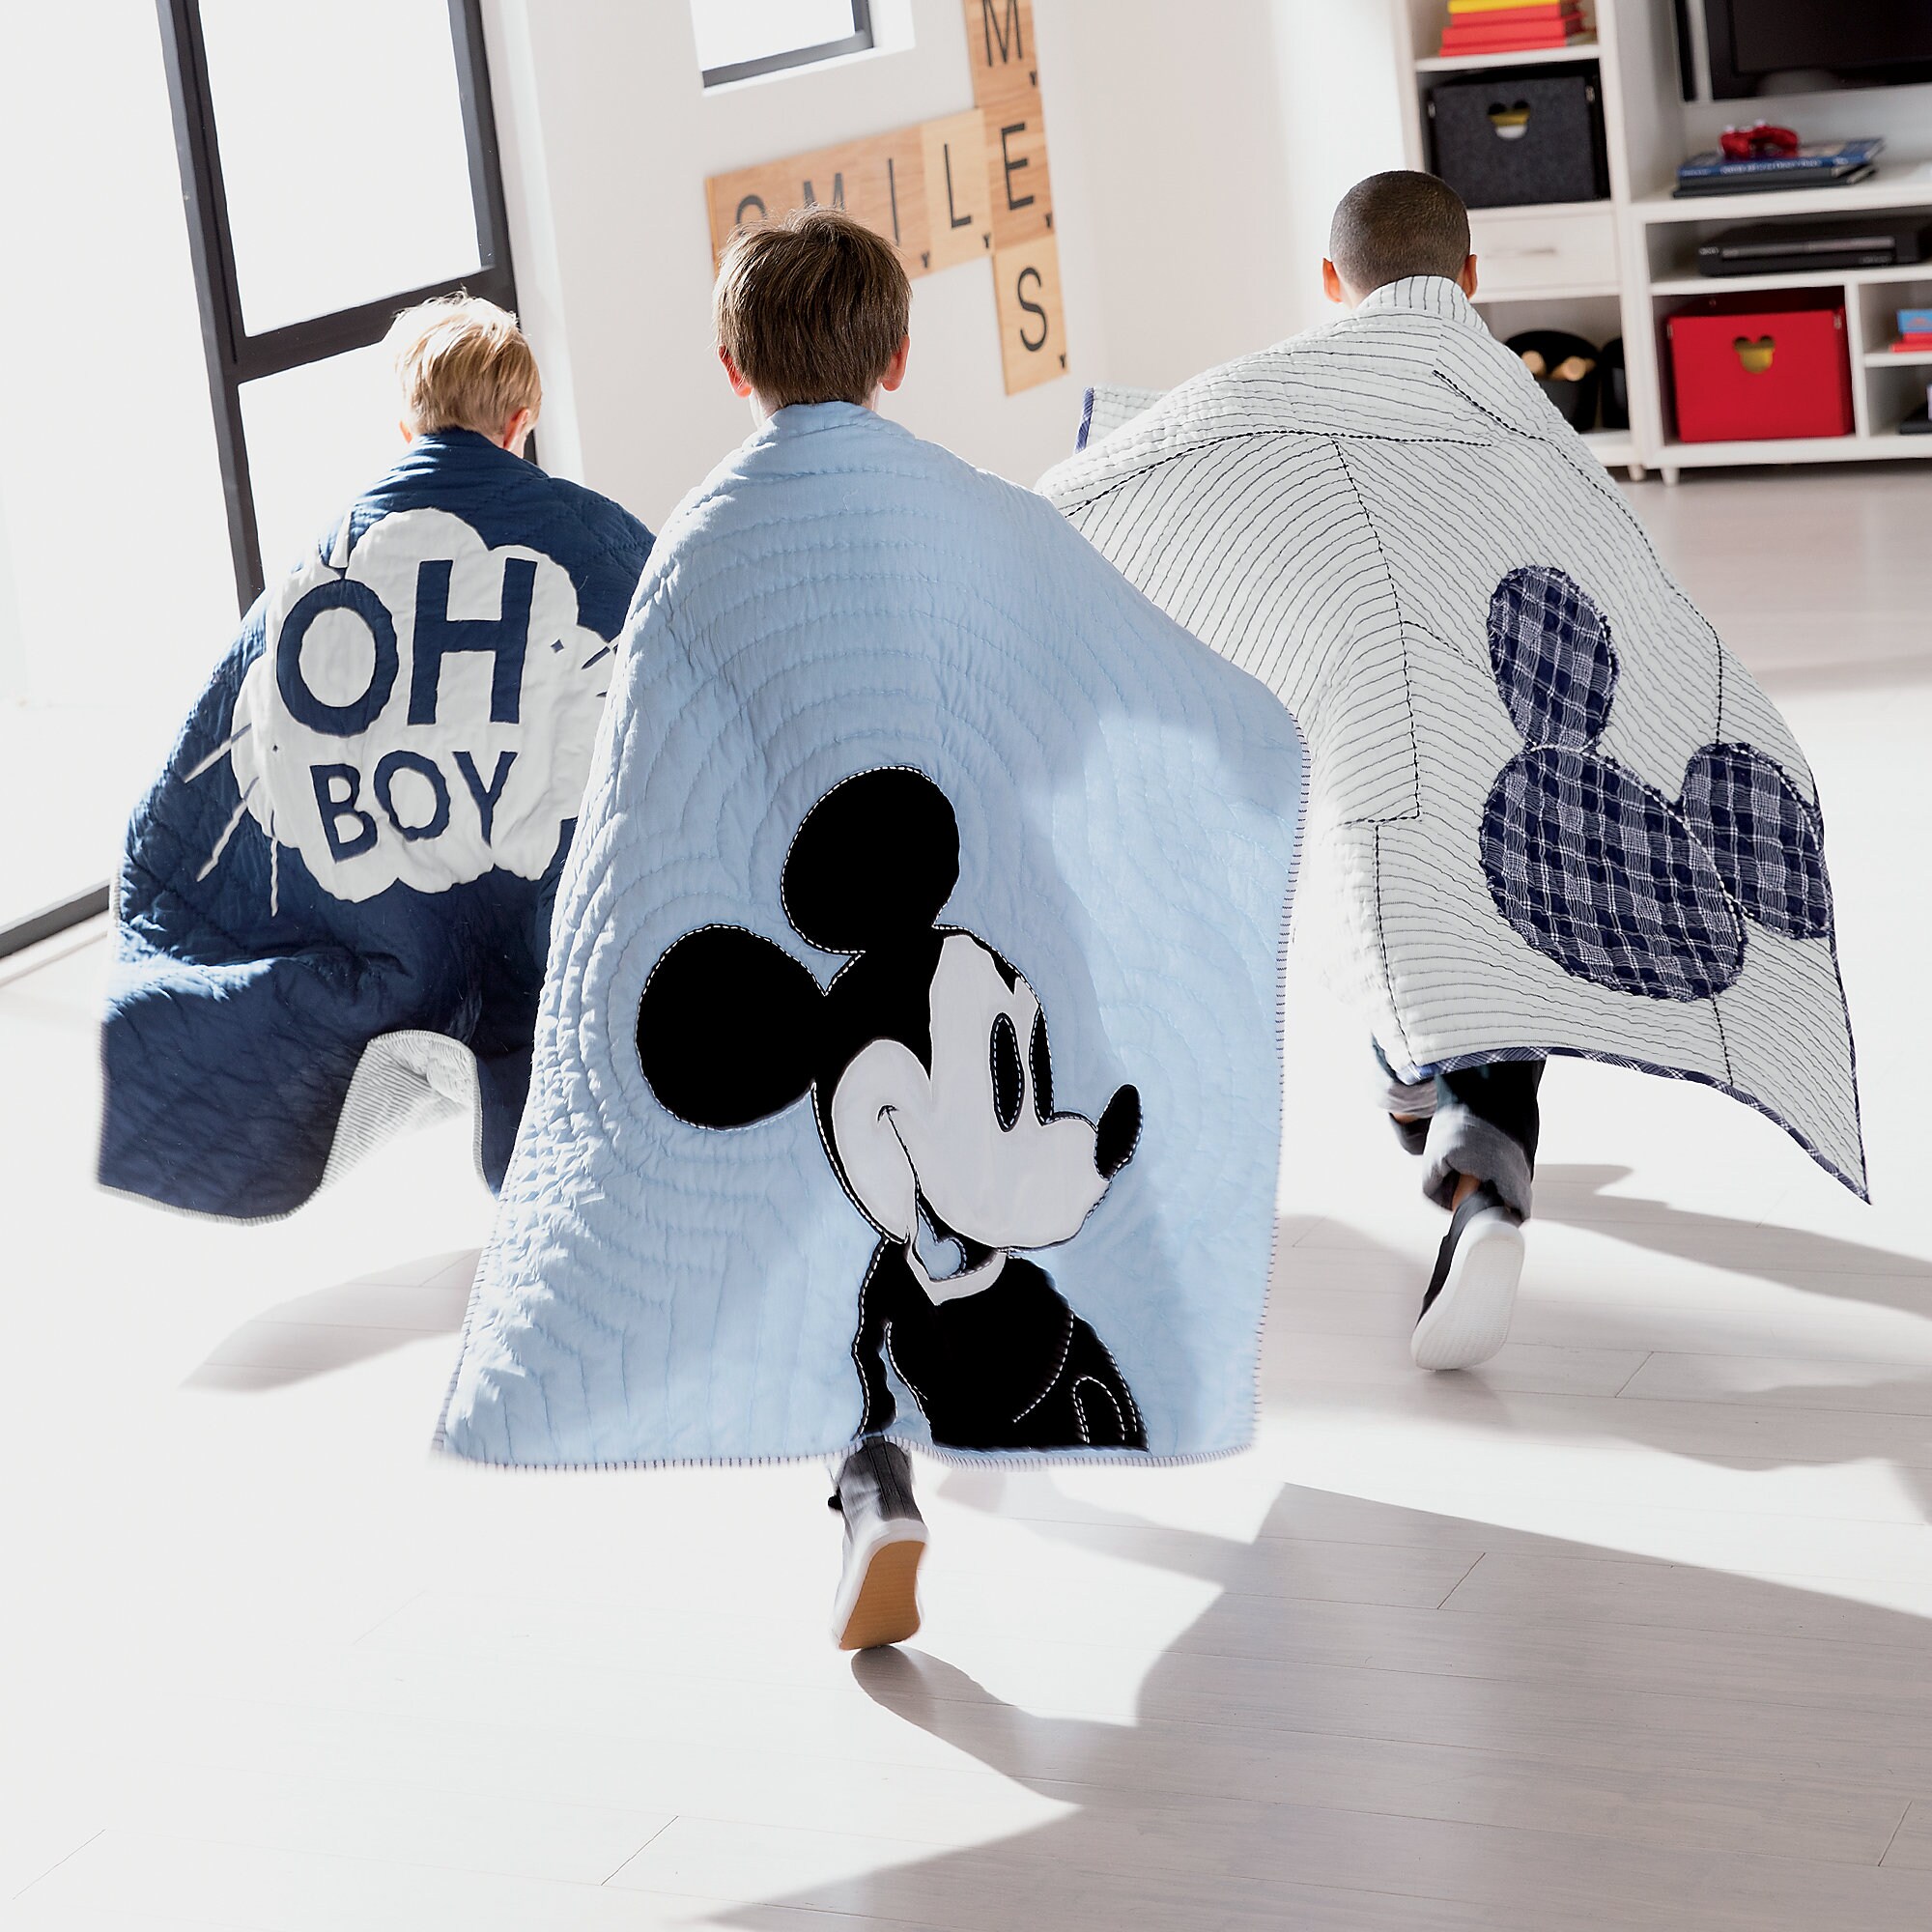 Mickey Mouse Color Toddler Quilt by Ethan Allen